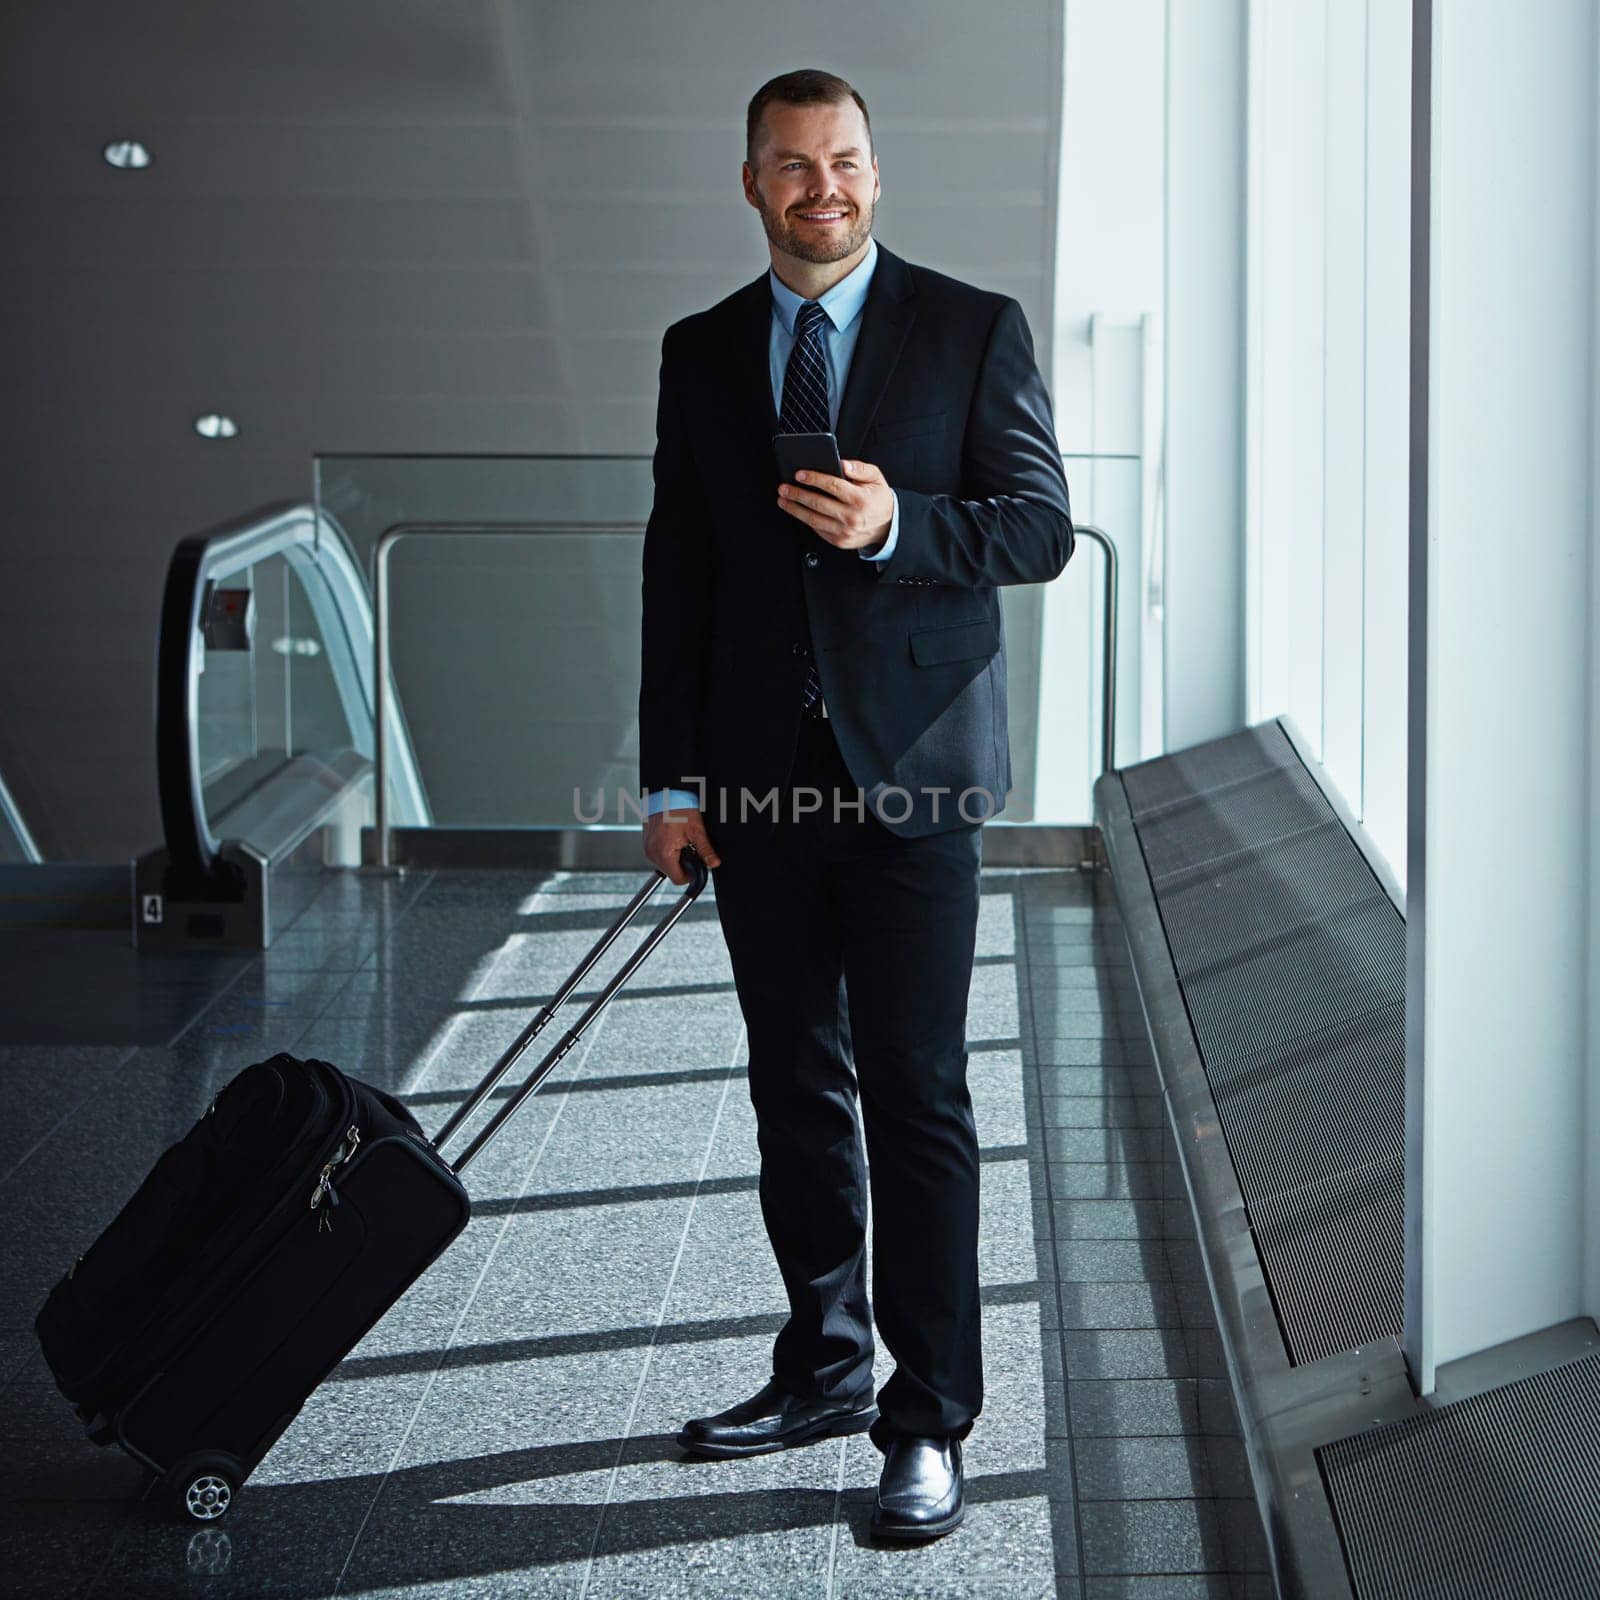 Social media, thinking or business man in airport with phone, luggage or suitcase for travel booking. Happy, entrepreneur or corporate worker texting to chat on mobile app on international flight.